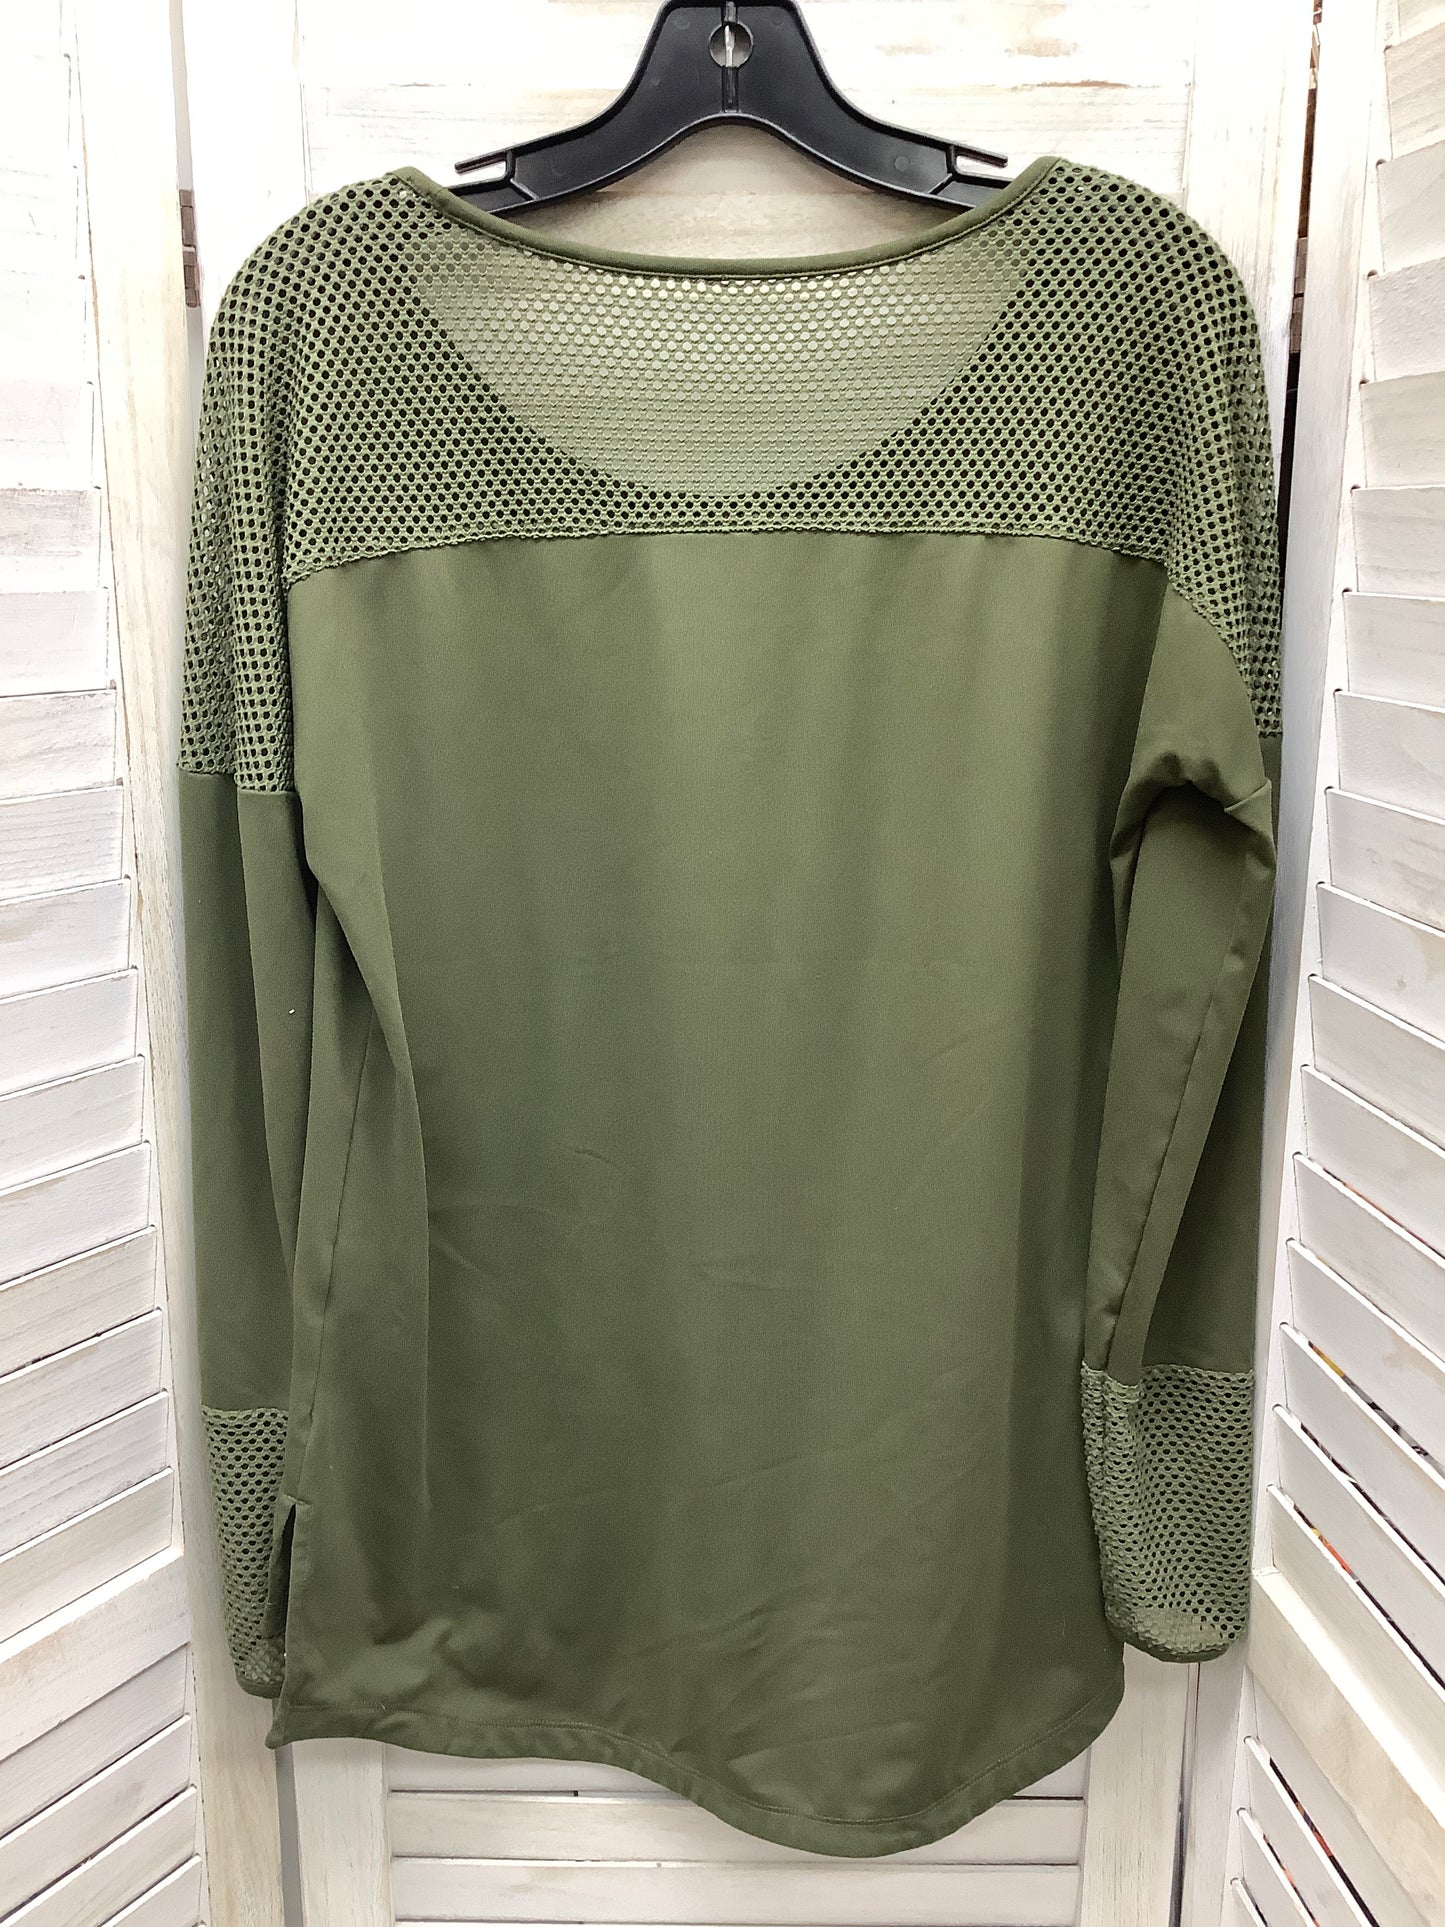 Athletic Top Long Sleeve Crewneck By Puma  Size: S